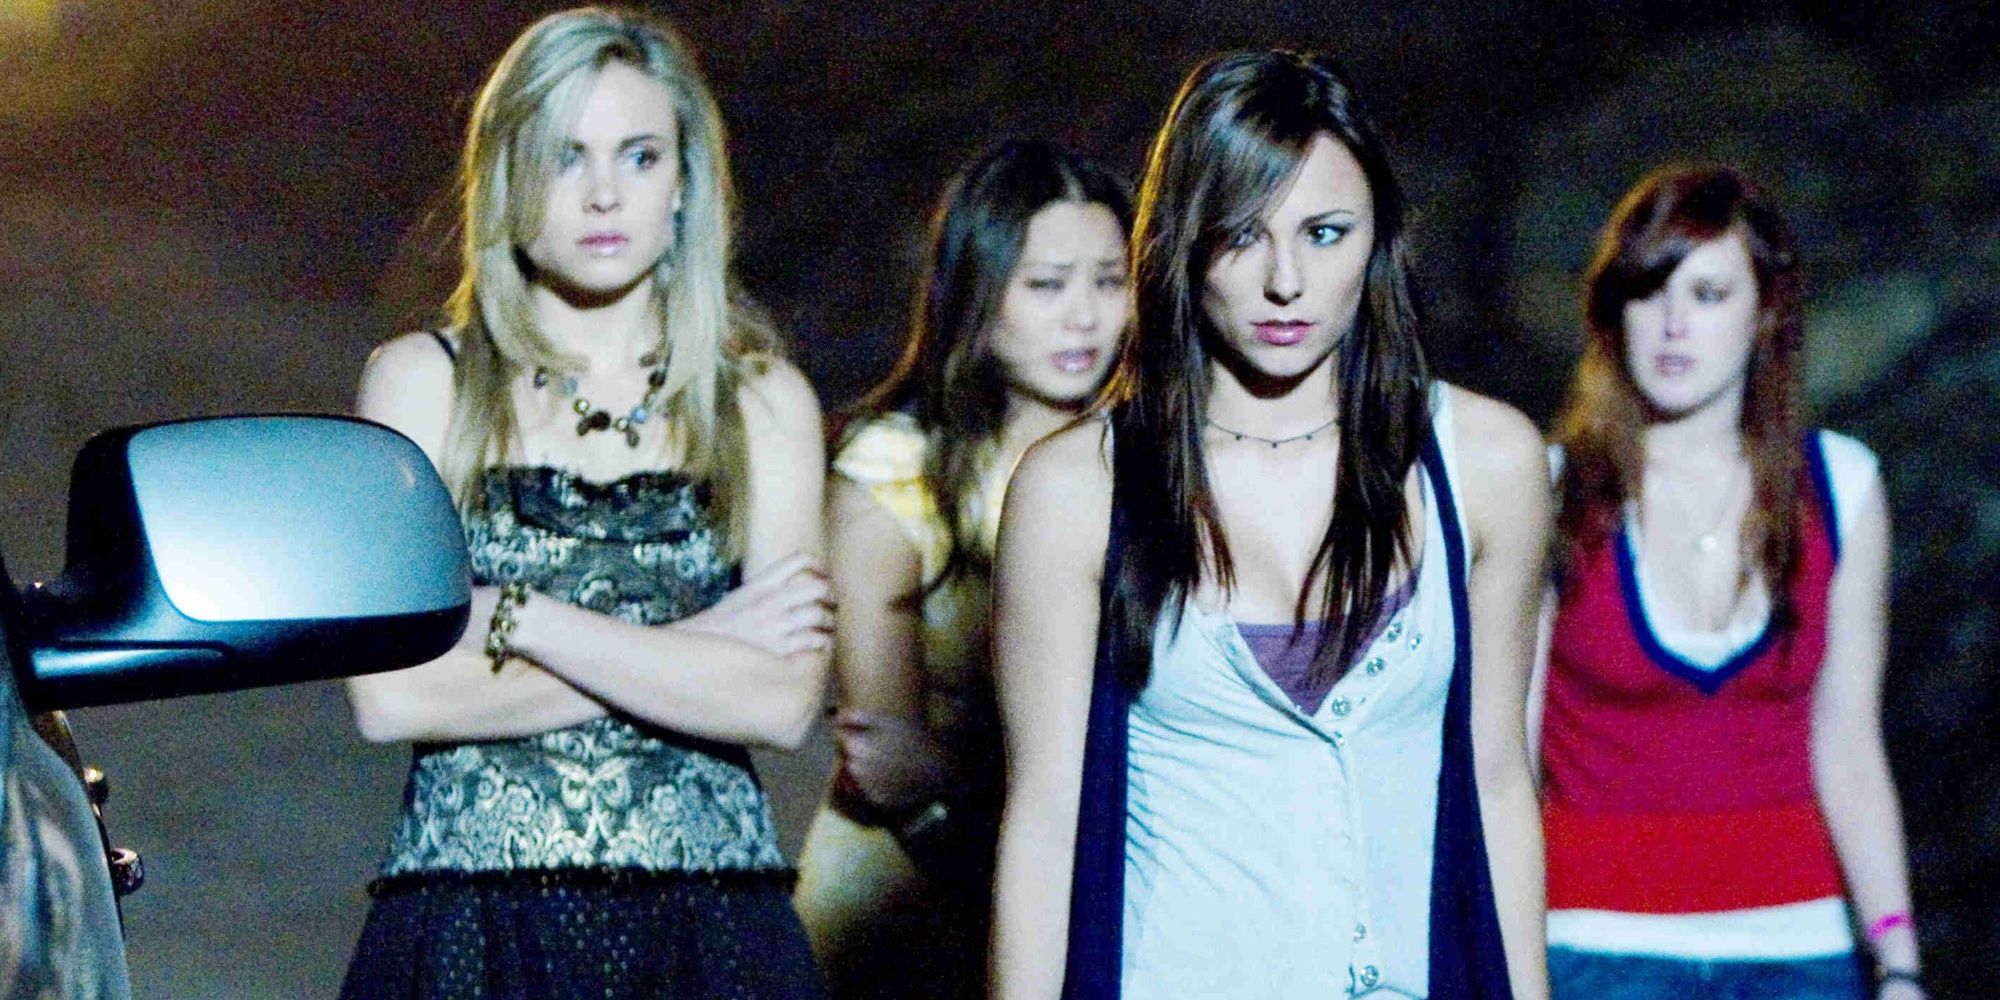 Jessica, Claire, Cassidy, and Ellie from Sorority Row (2009)